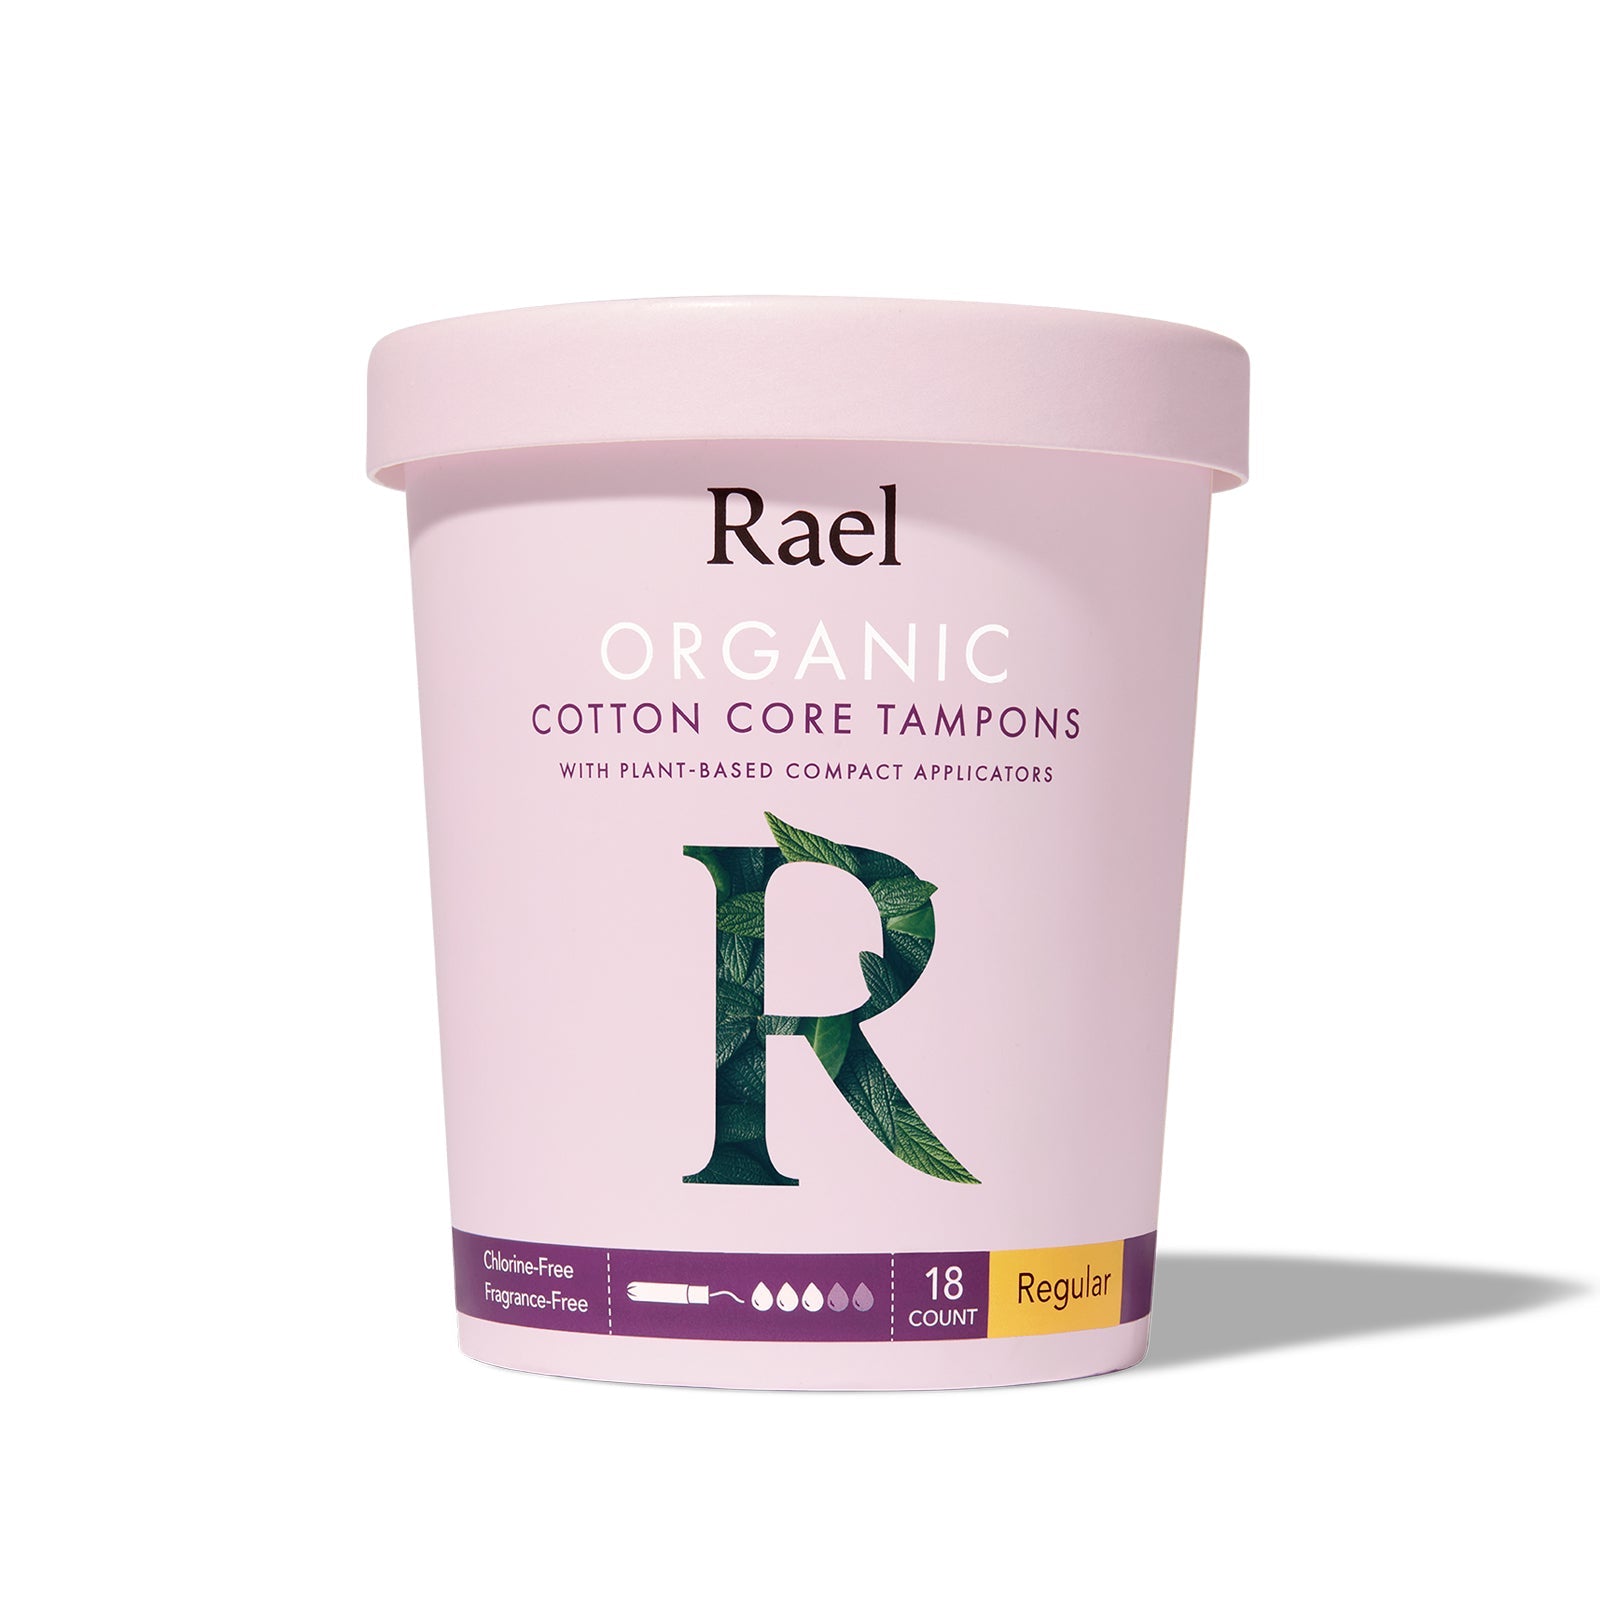 Rael Regular Organic Cotton Tampons with Plant-based Compact Applicator 18s